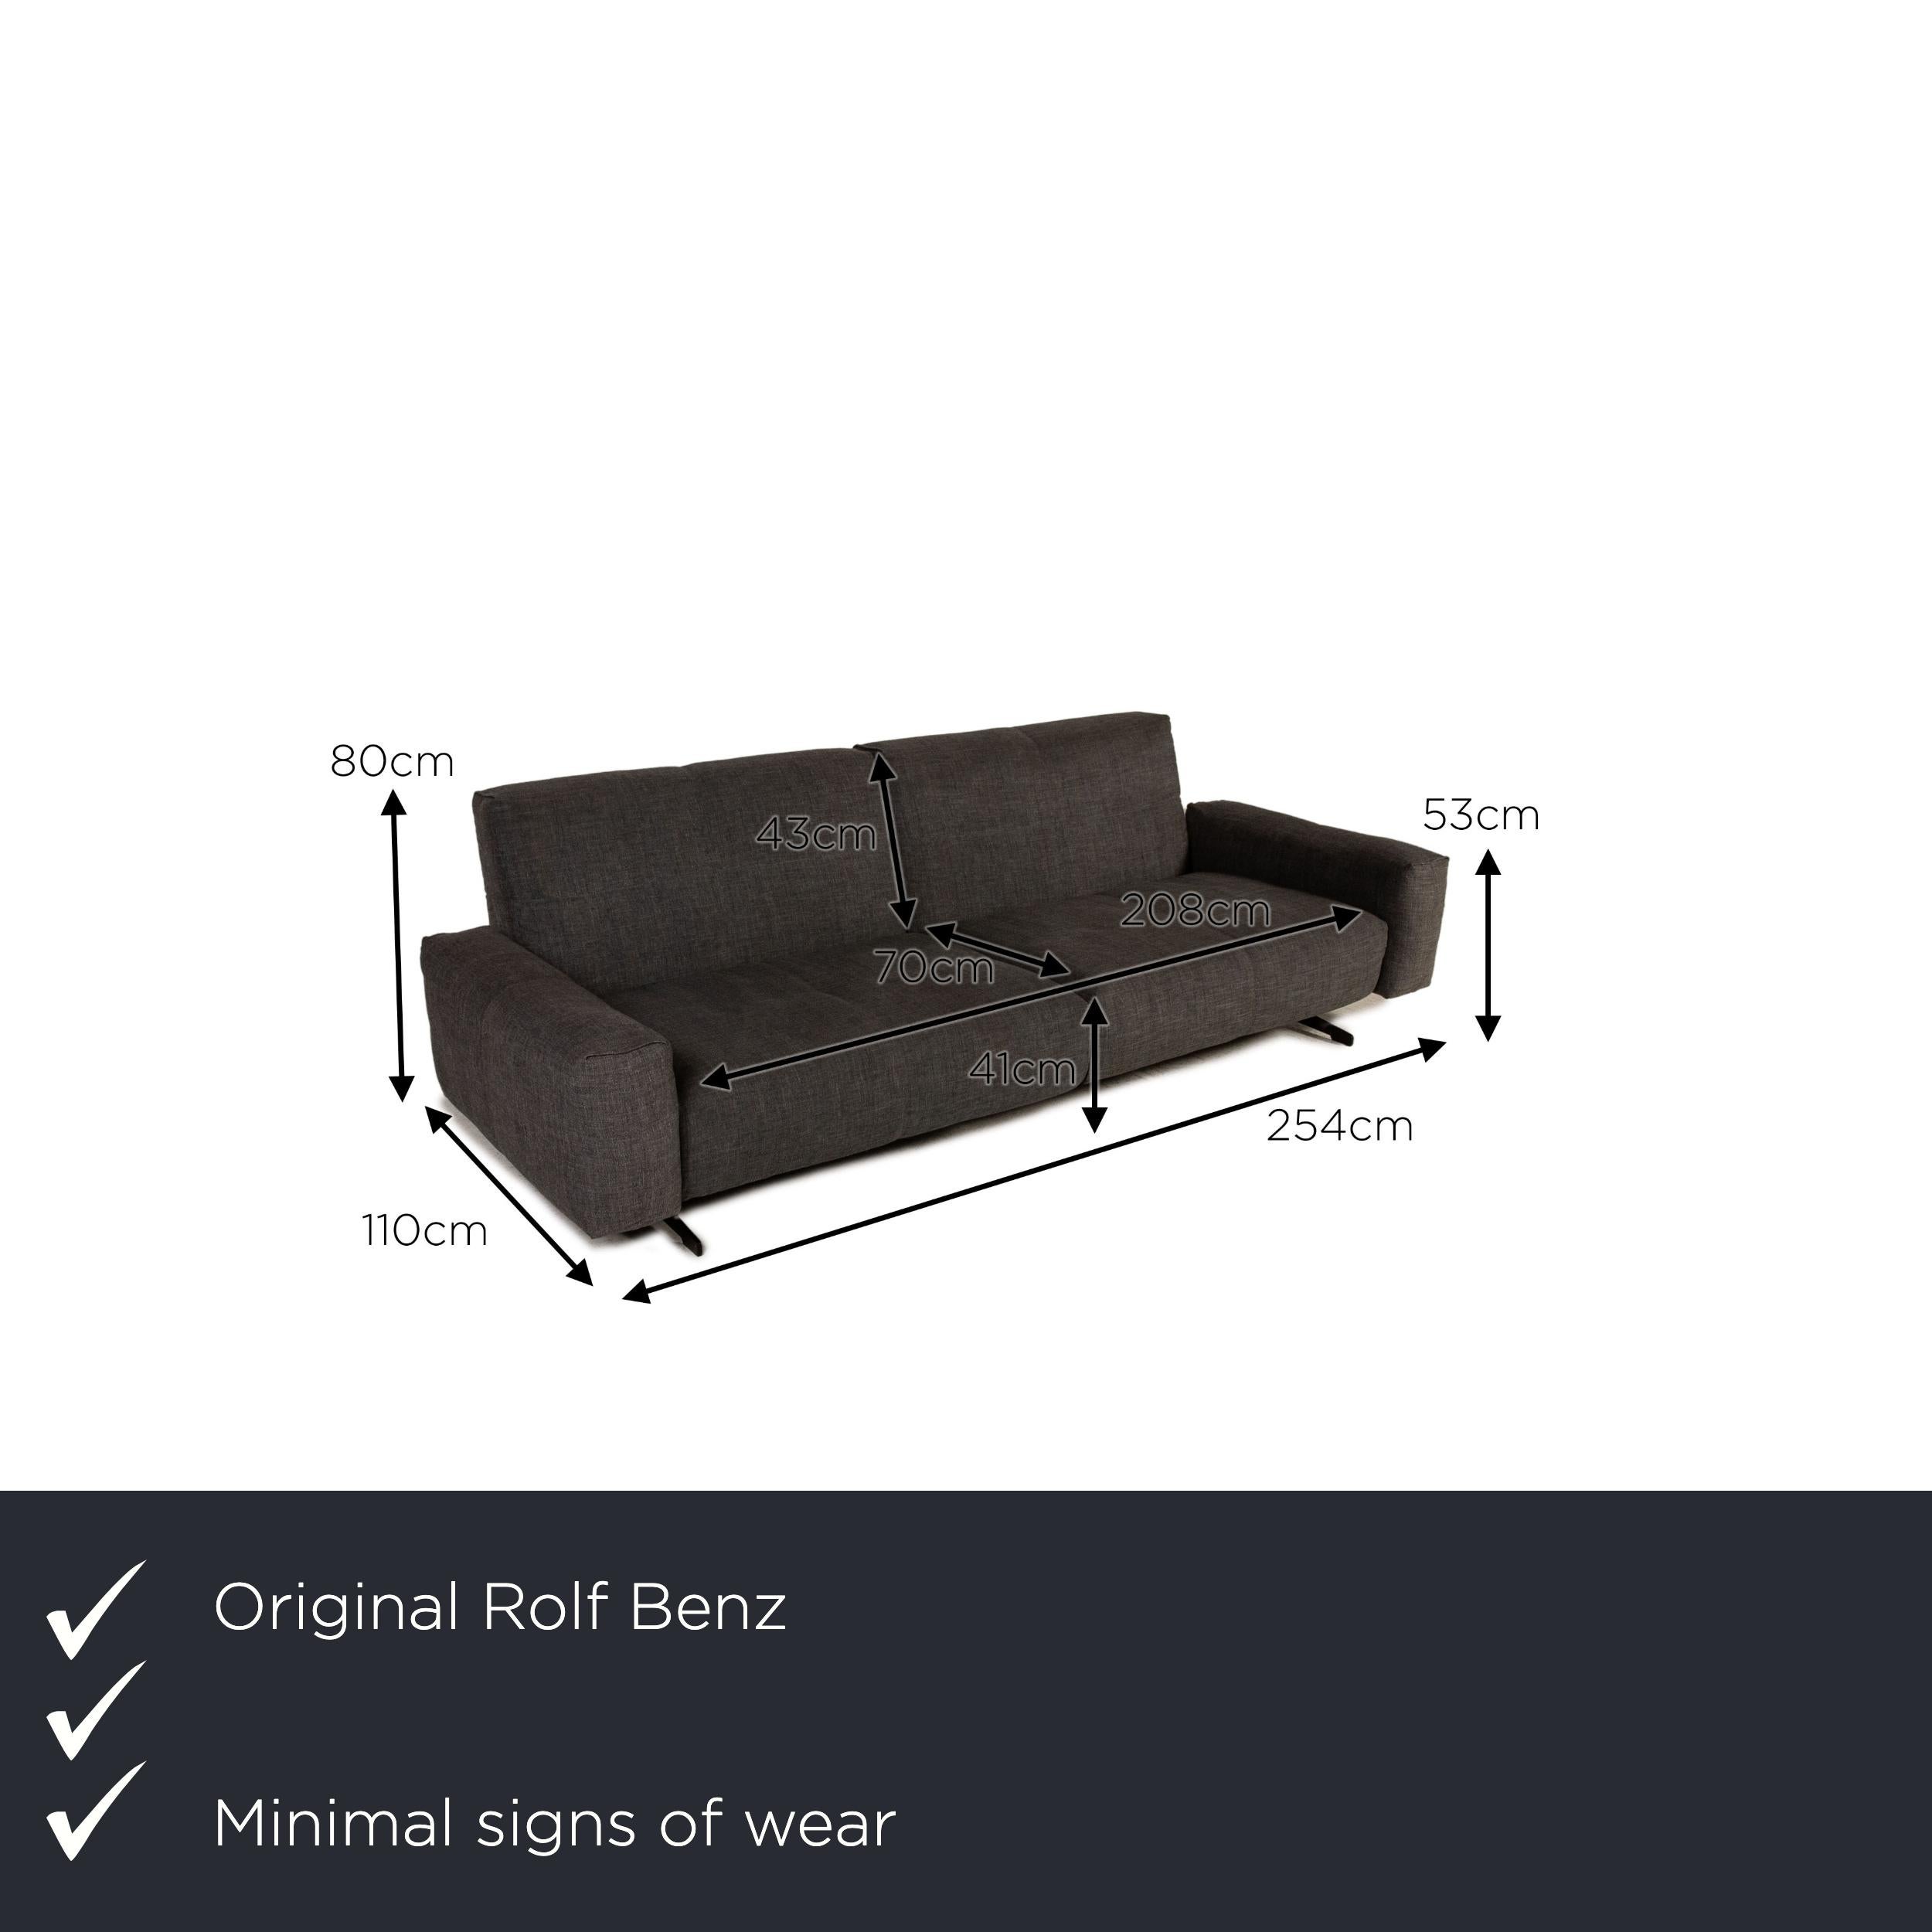 We present to you a Rolf Benz 50 fabric sofa gray four-seater couch relaxation function.

Product measurements in centimeters:

depth: 110
width: 254
height: 80
seat height: 41
rest height: 53
seat depth: 70
seat width: 208
back height: